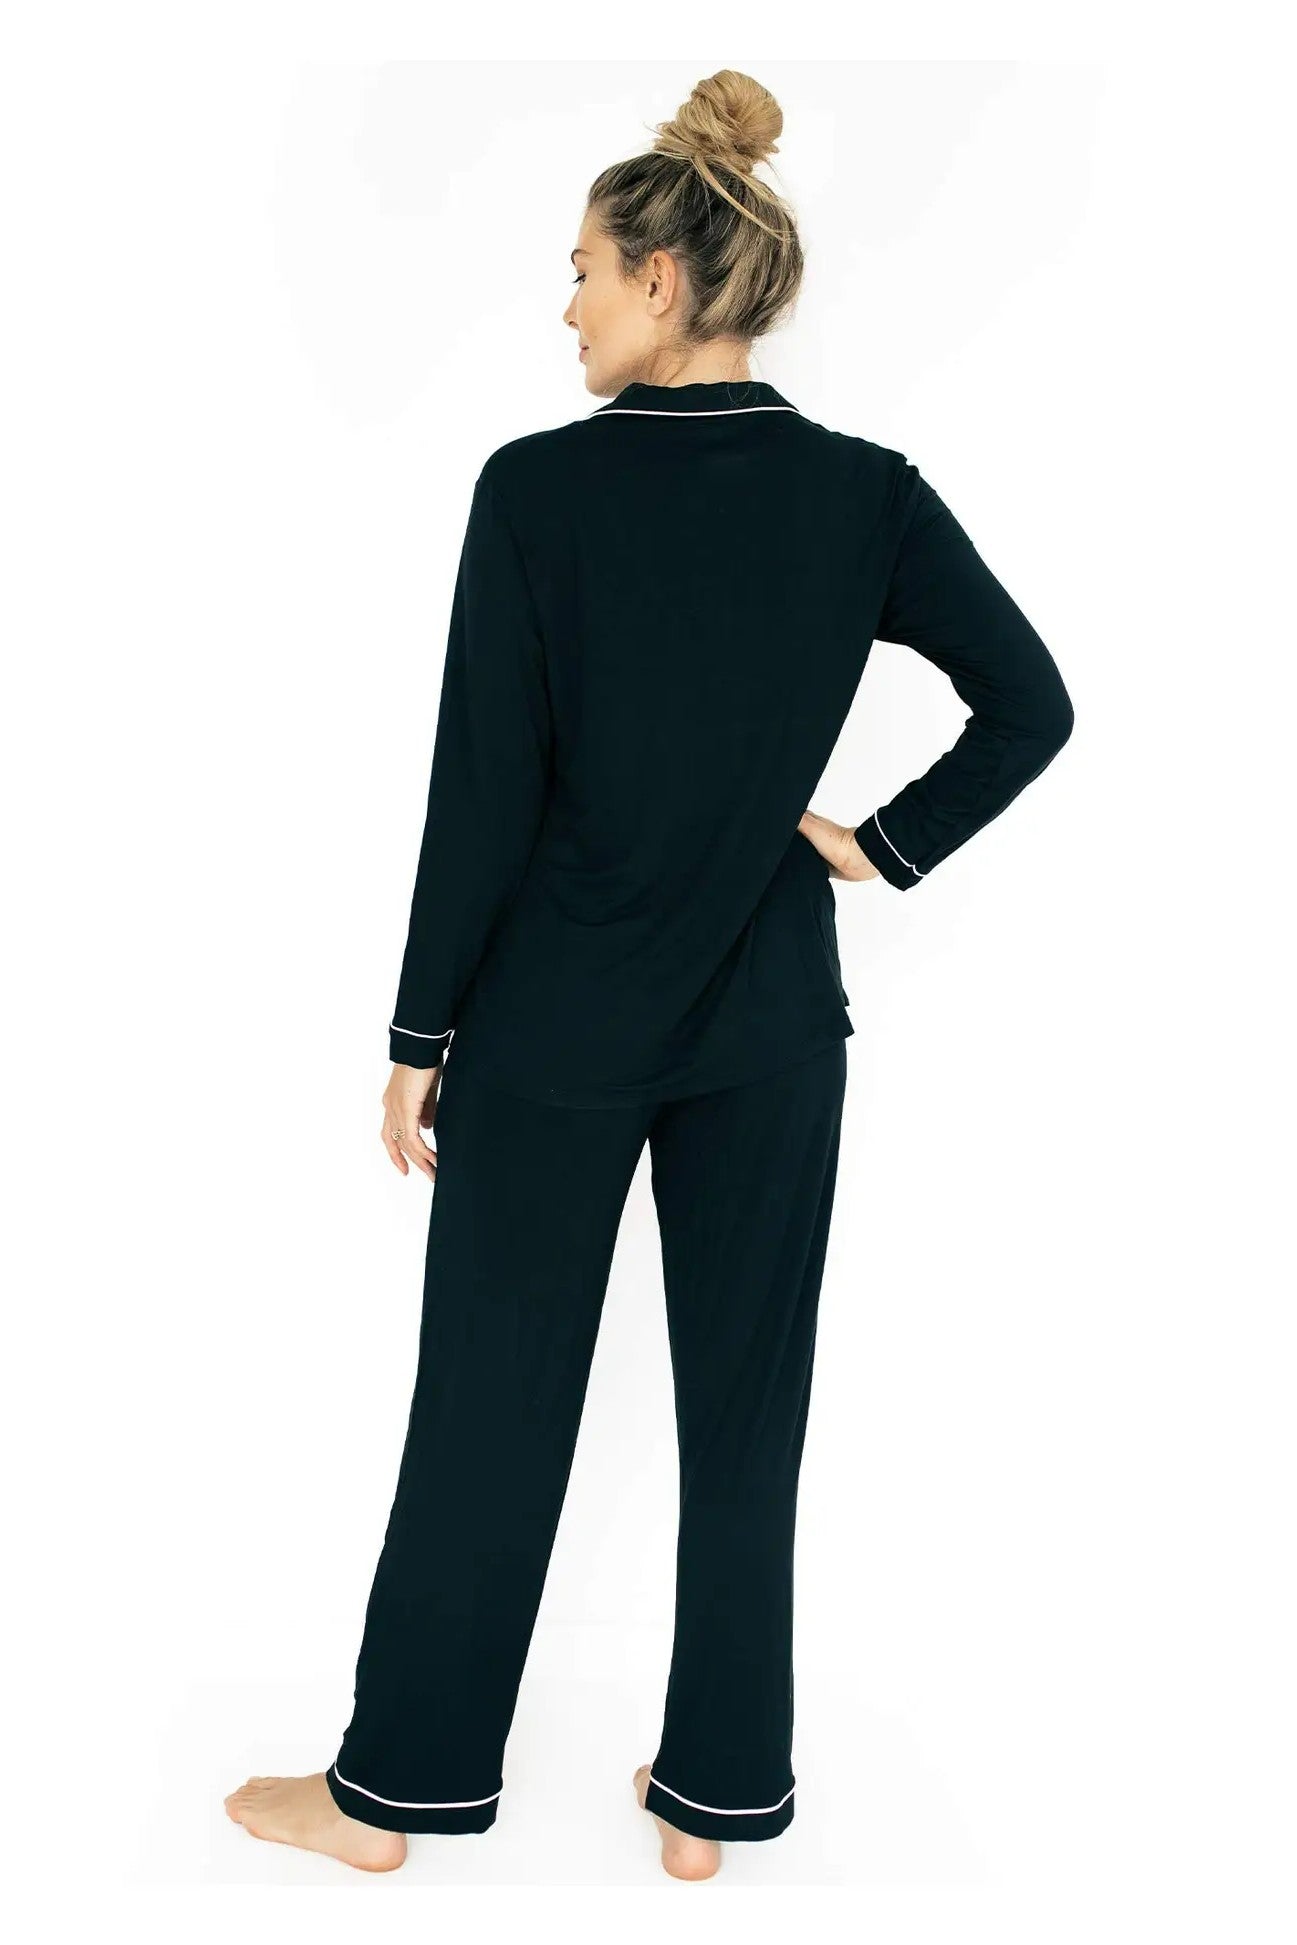 Clea Bamboo Classic Long Sleeve Pajama Set, Kindred Bravely